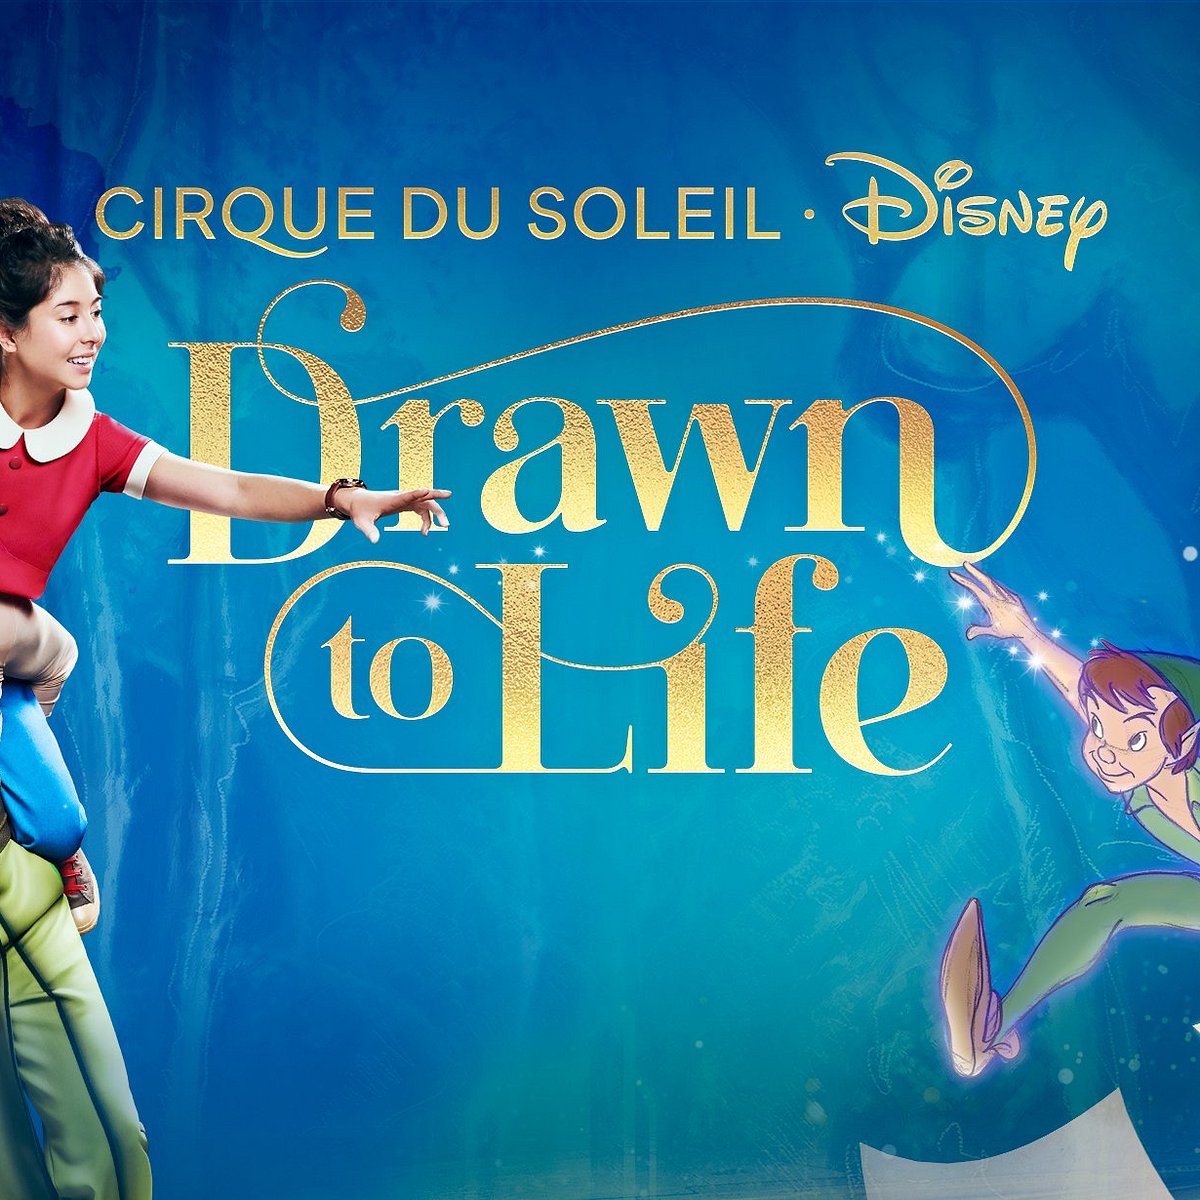 Drawn to Life by Cirque du Soleil (Orlando) All You Need to Know